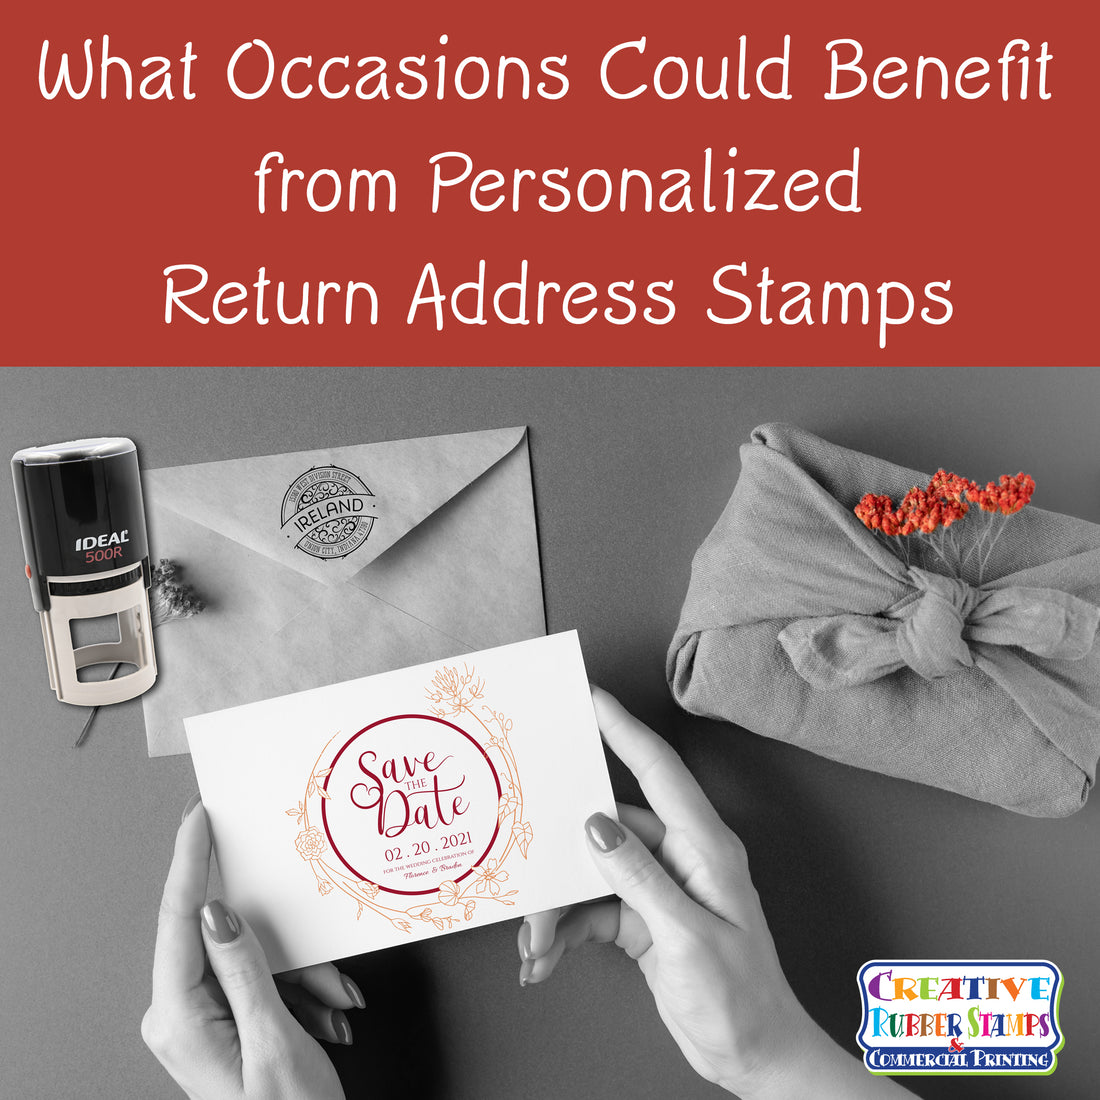 What Occasions Could Benefit from Personalized Return Address Stamps